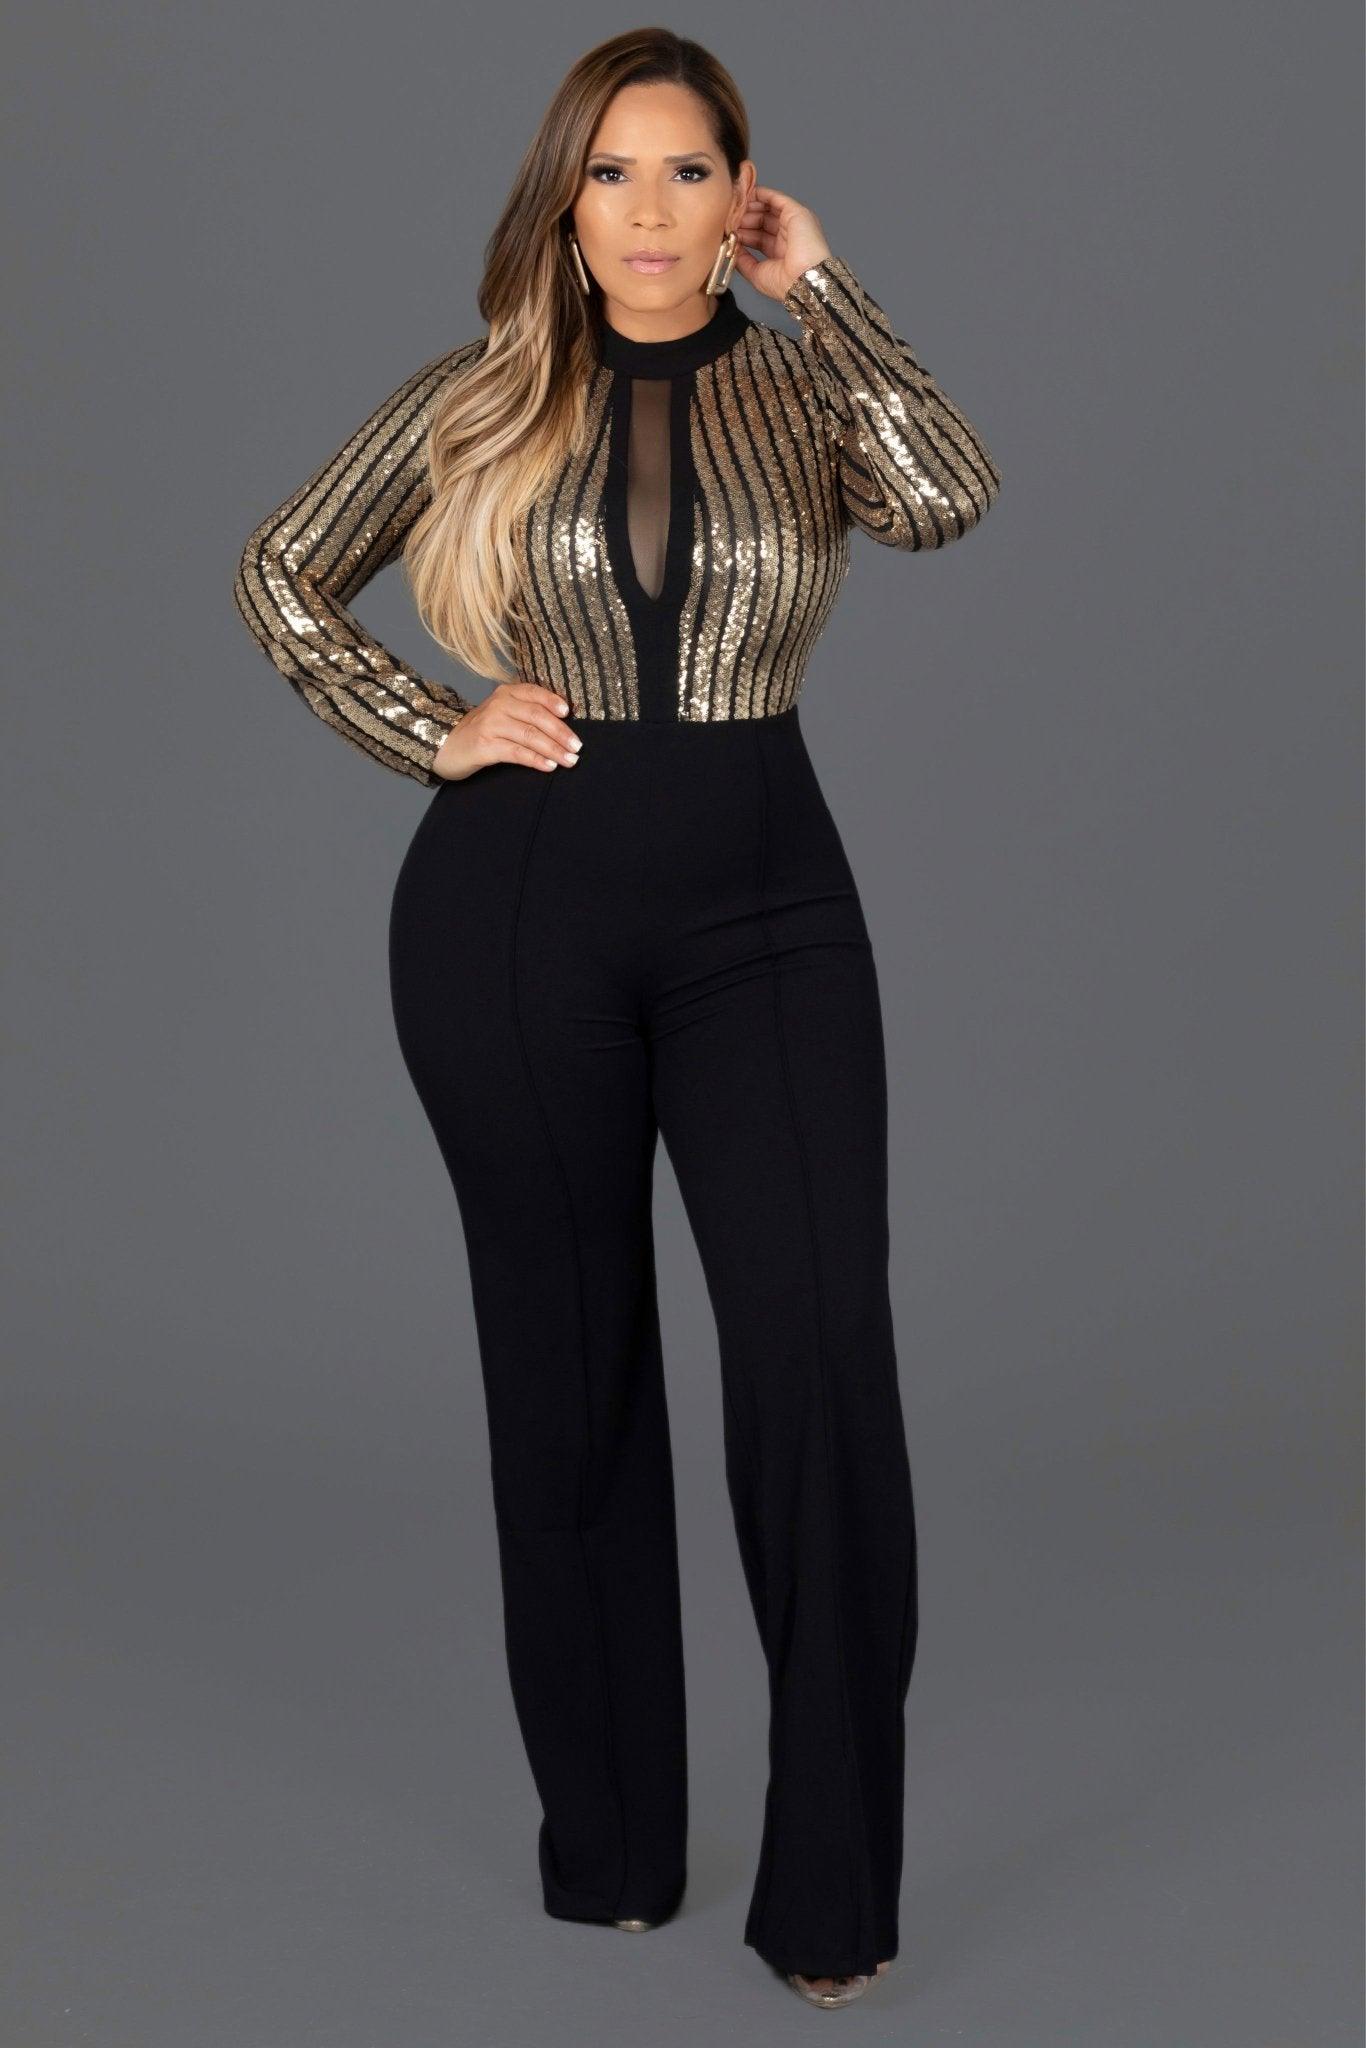 Halo Sequined Pattern Jumpsuit - MY SEXY STYLES